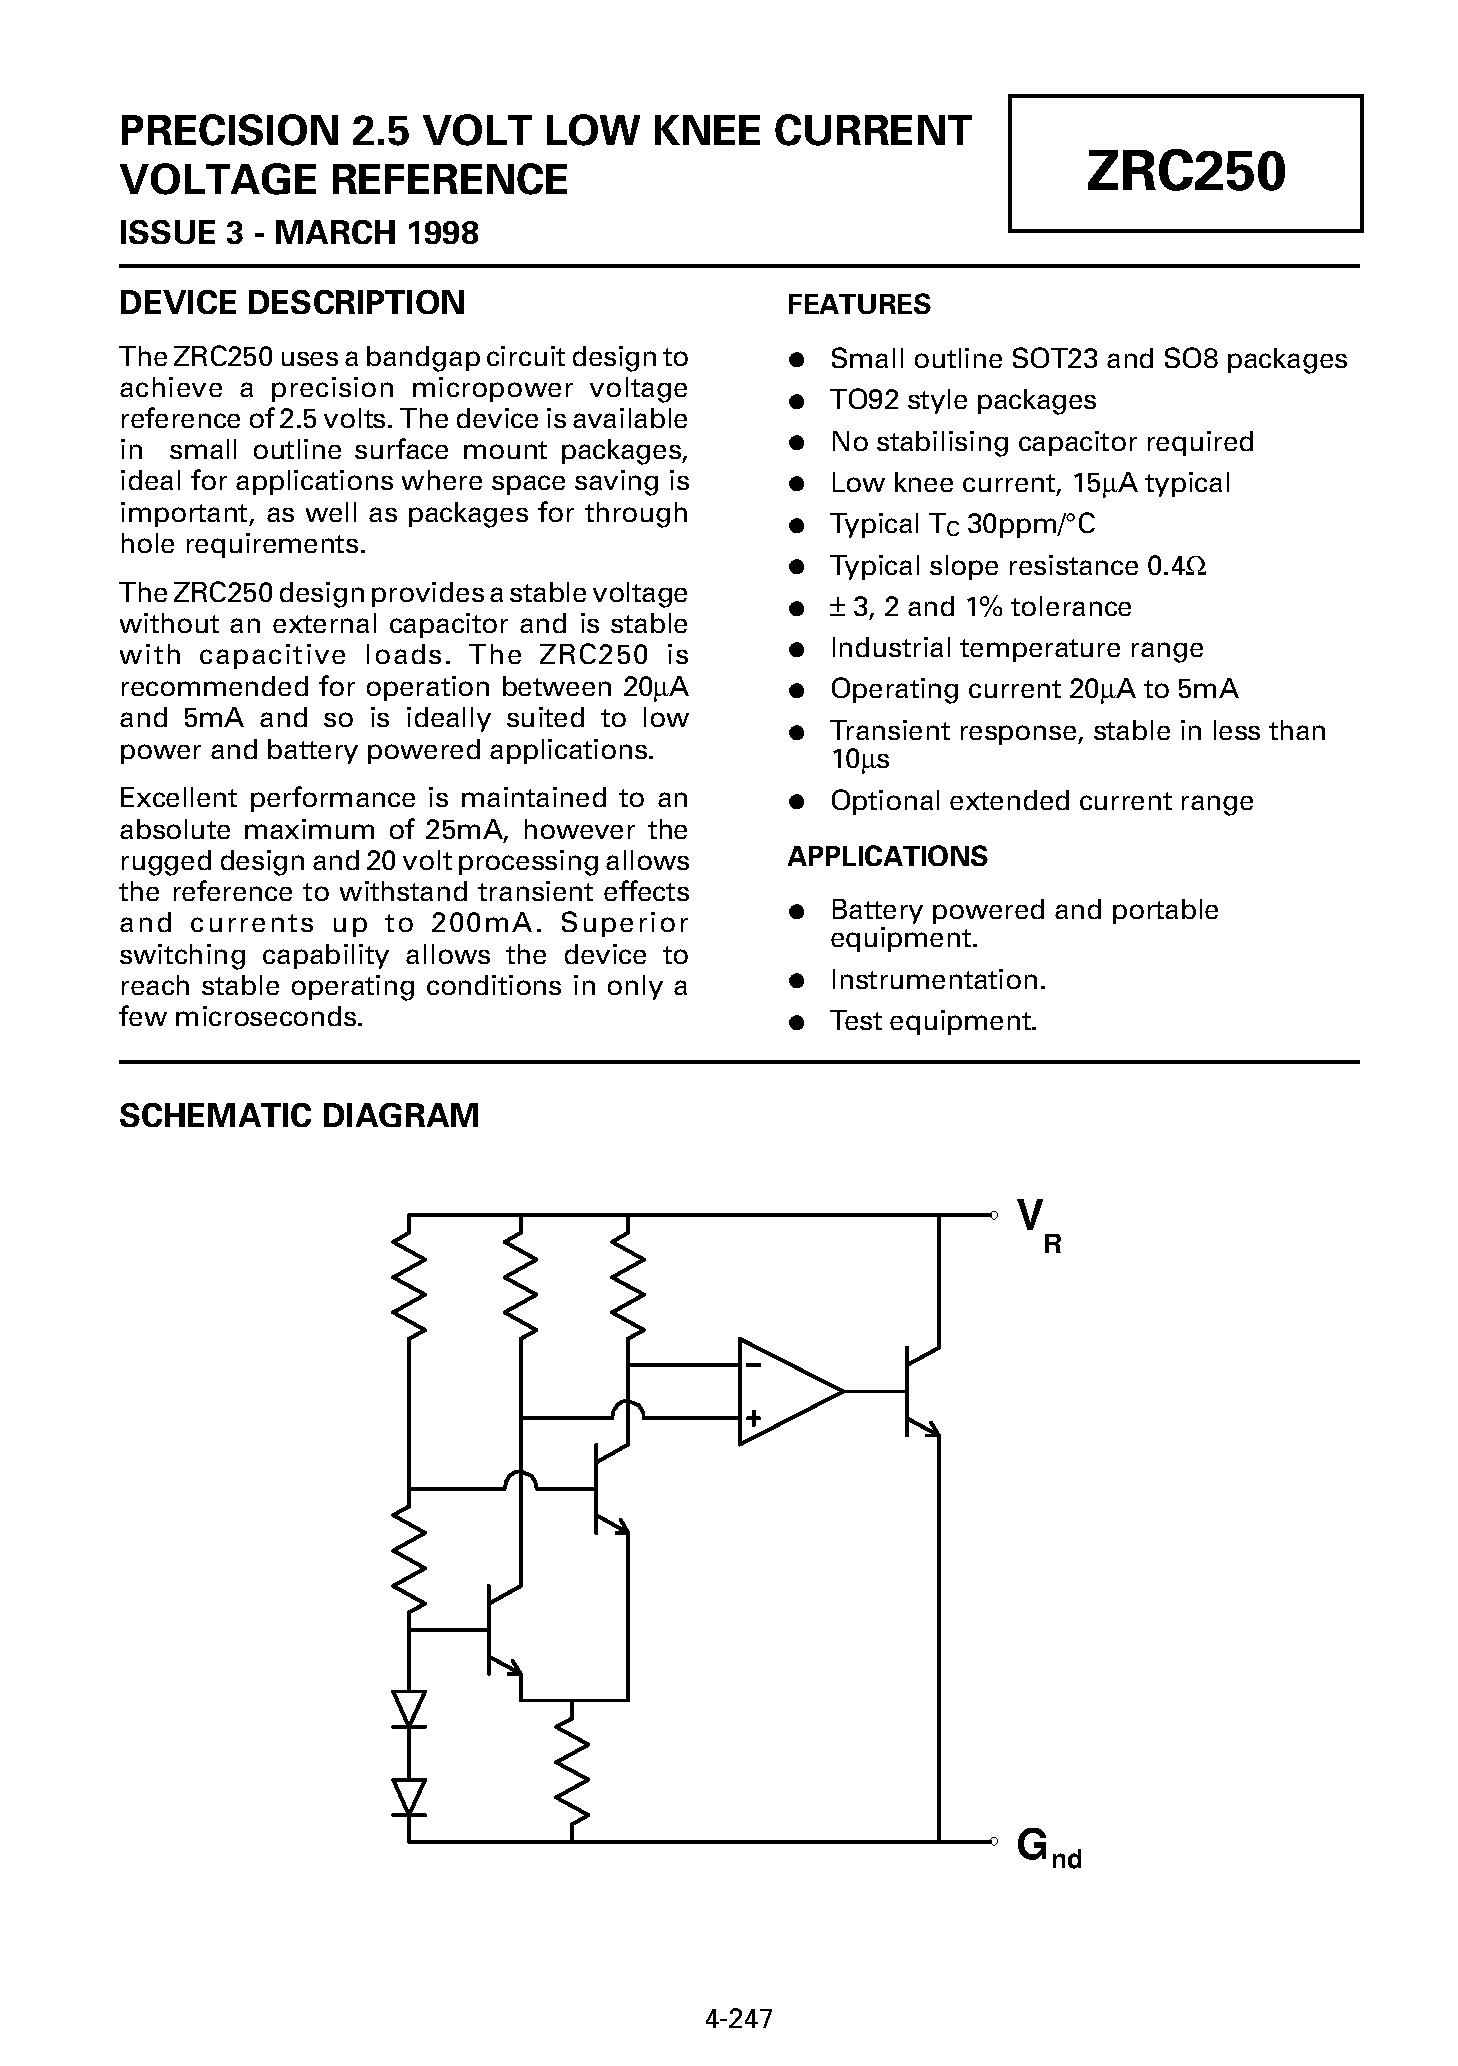 Datasheet ZRC250A01 - PRECISION 2.5 VOLT LOW KNEE CURRENT VOLTAGE REFERENCE page 1